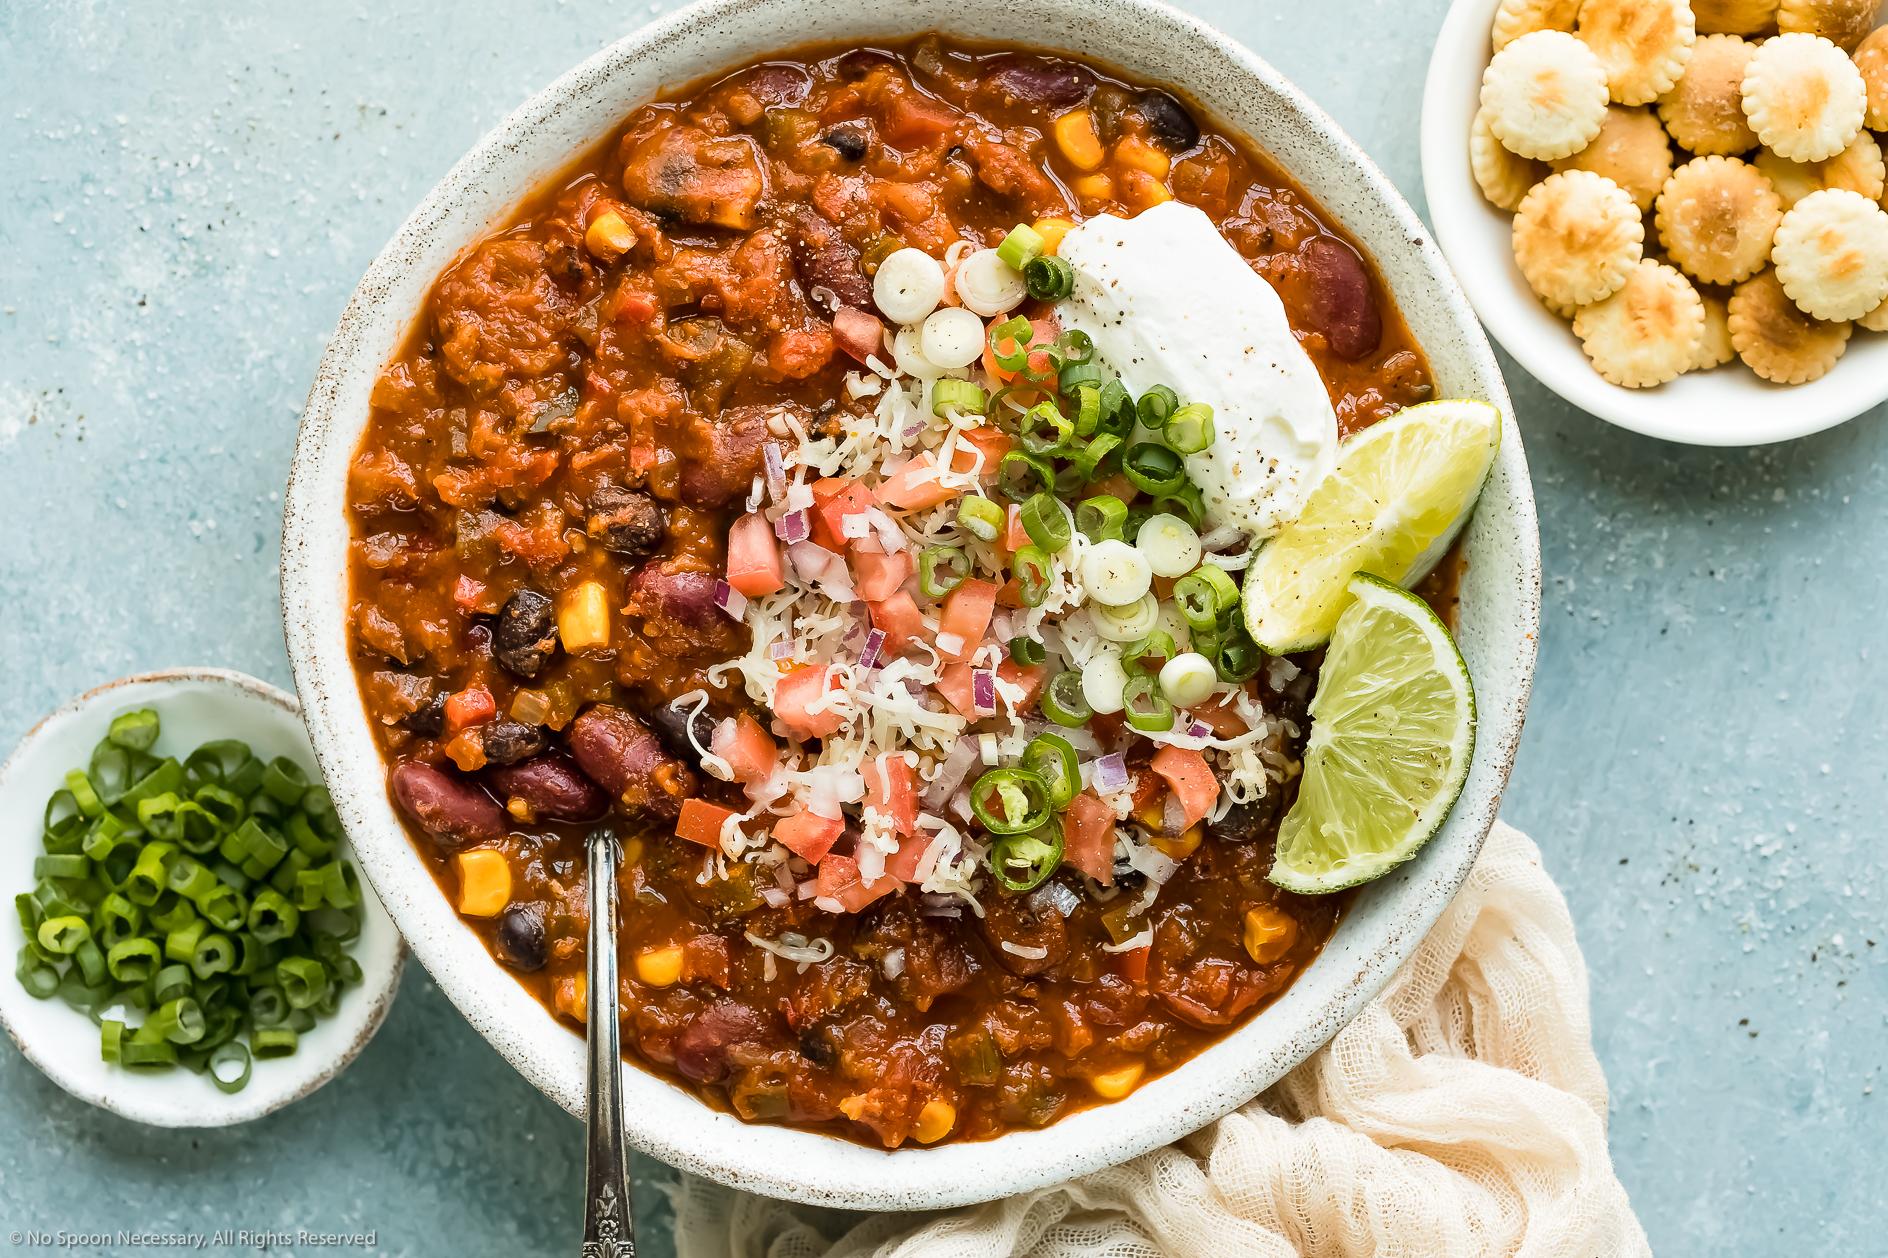  Say goodbye to boring vegetarian meals with this hearty and delicious chili recipe.